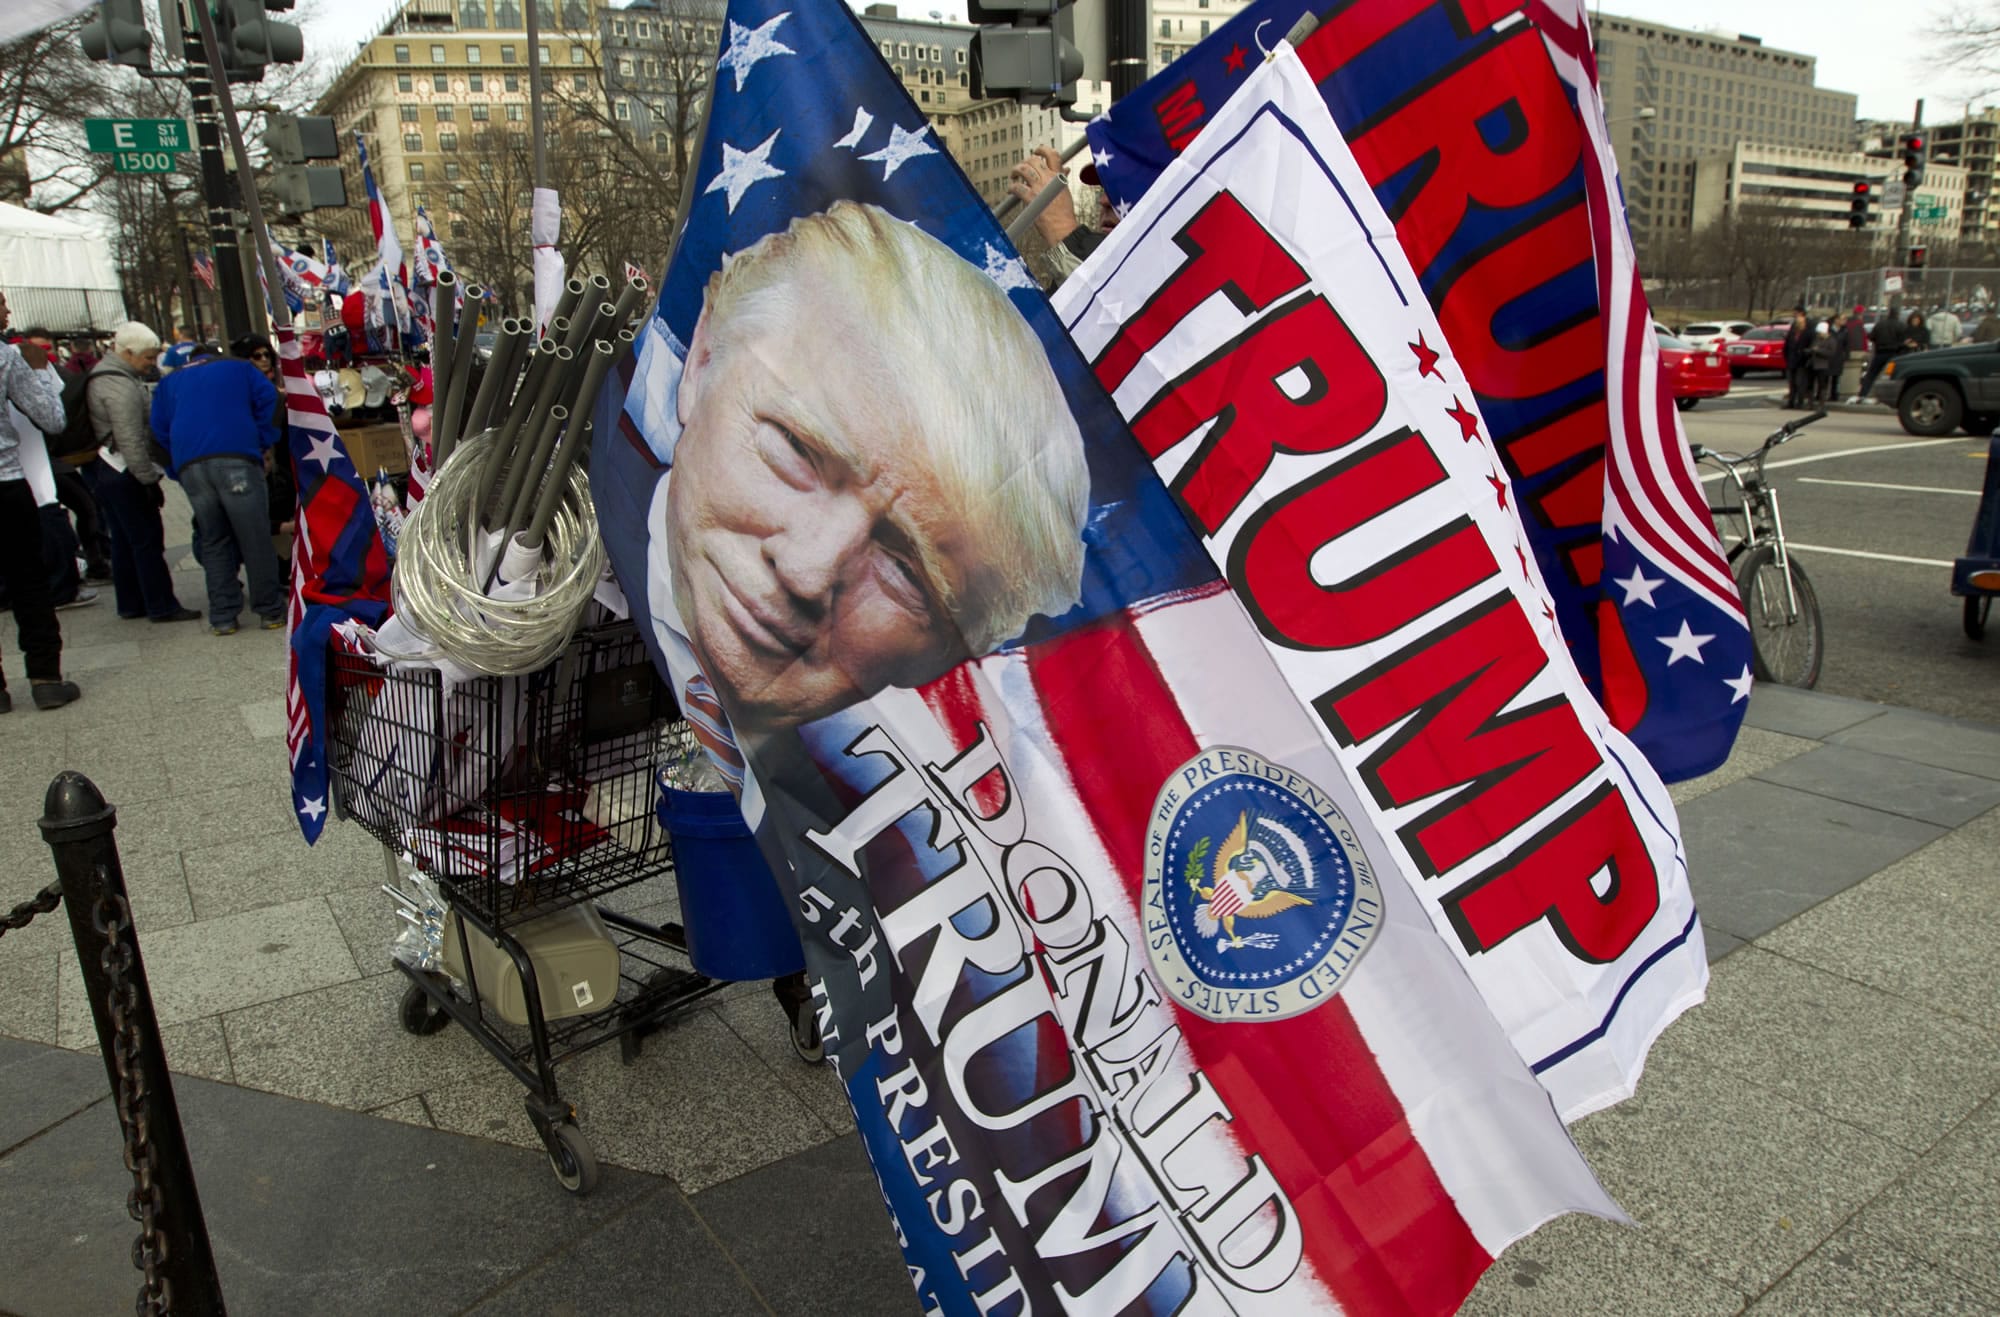 Flags with the image of President-elect Donald Trump are displayed for sale in Pennsylvania Avenue in Washington on Thursday ahead of Friday's inauguration.